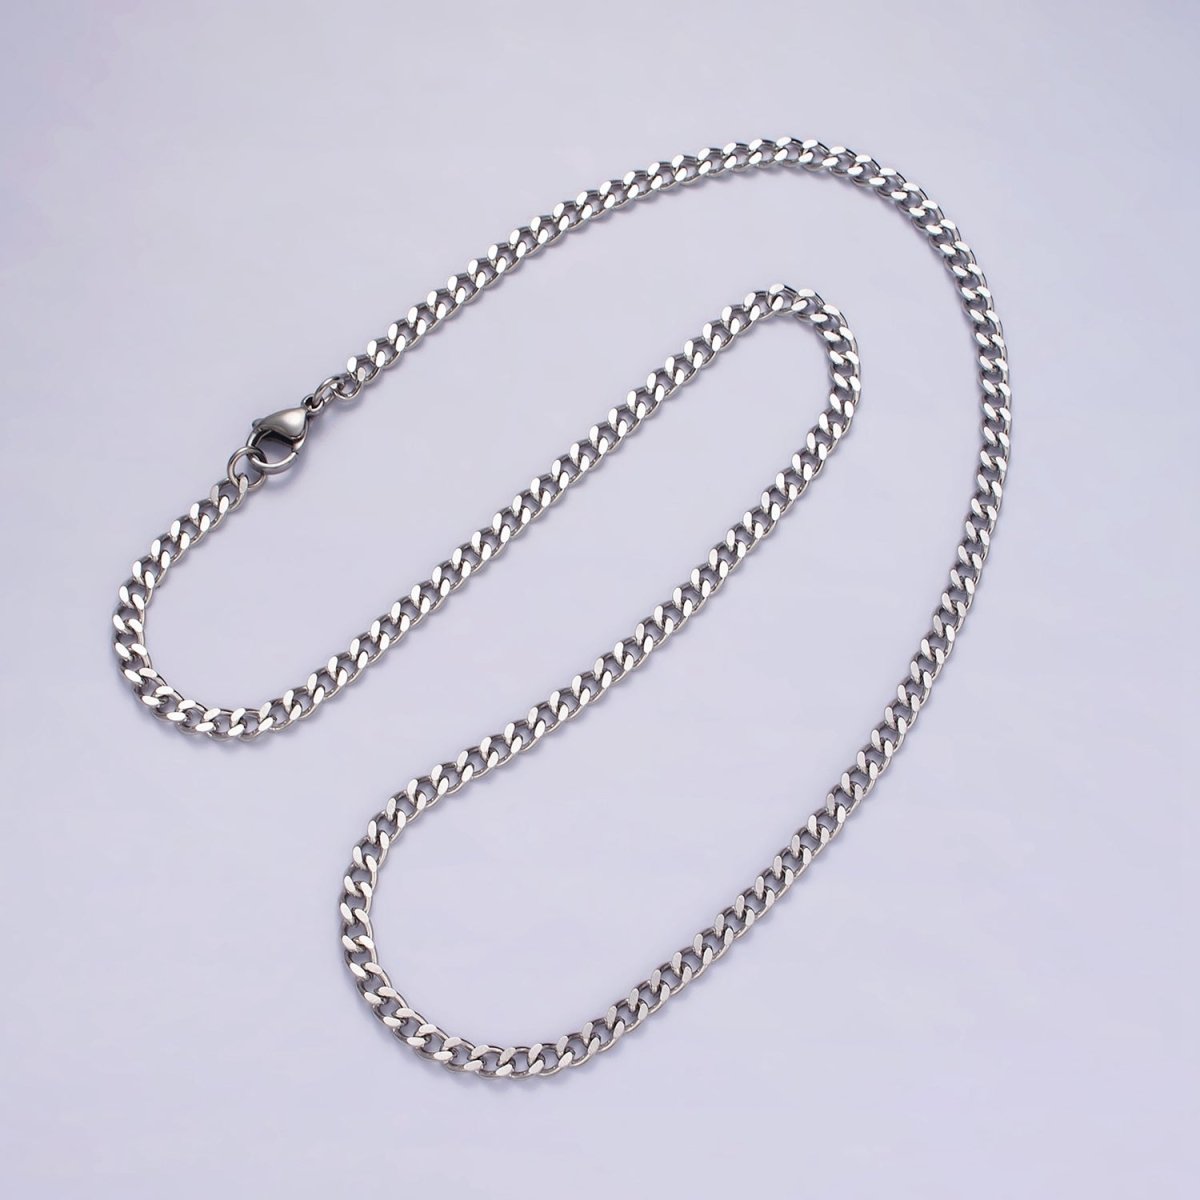 4mm Wide Stainless Steel Chain - 21.6", 23.6" Unisex Silver Cuban Link Chains Necklace | WA-2143 to WA-2146 Clearance Pricing - DLUXCA